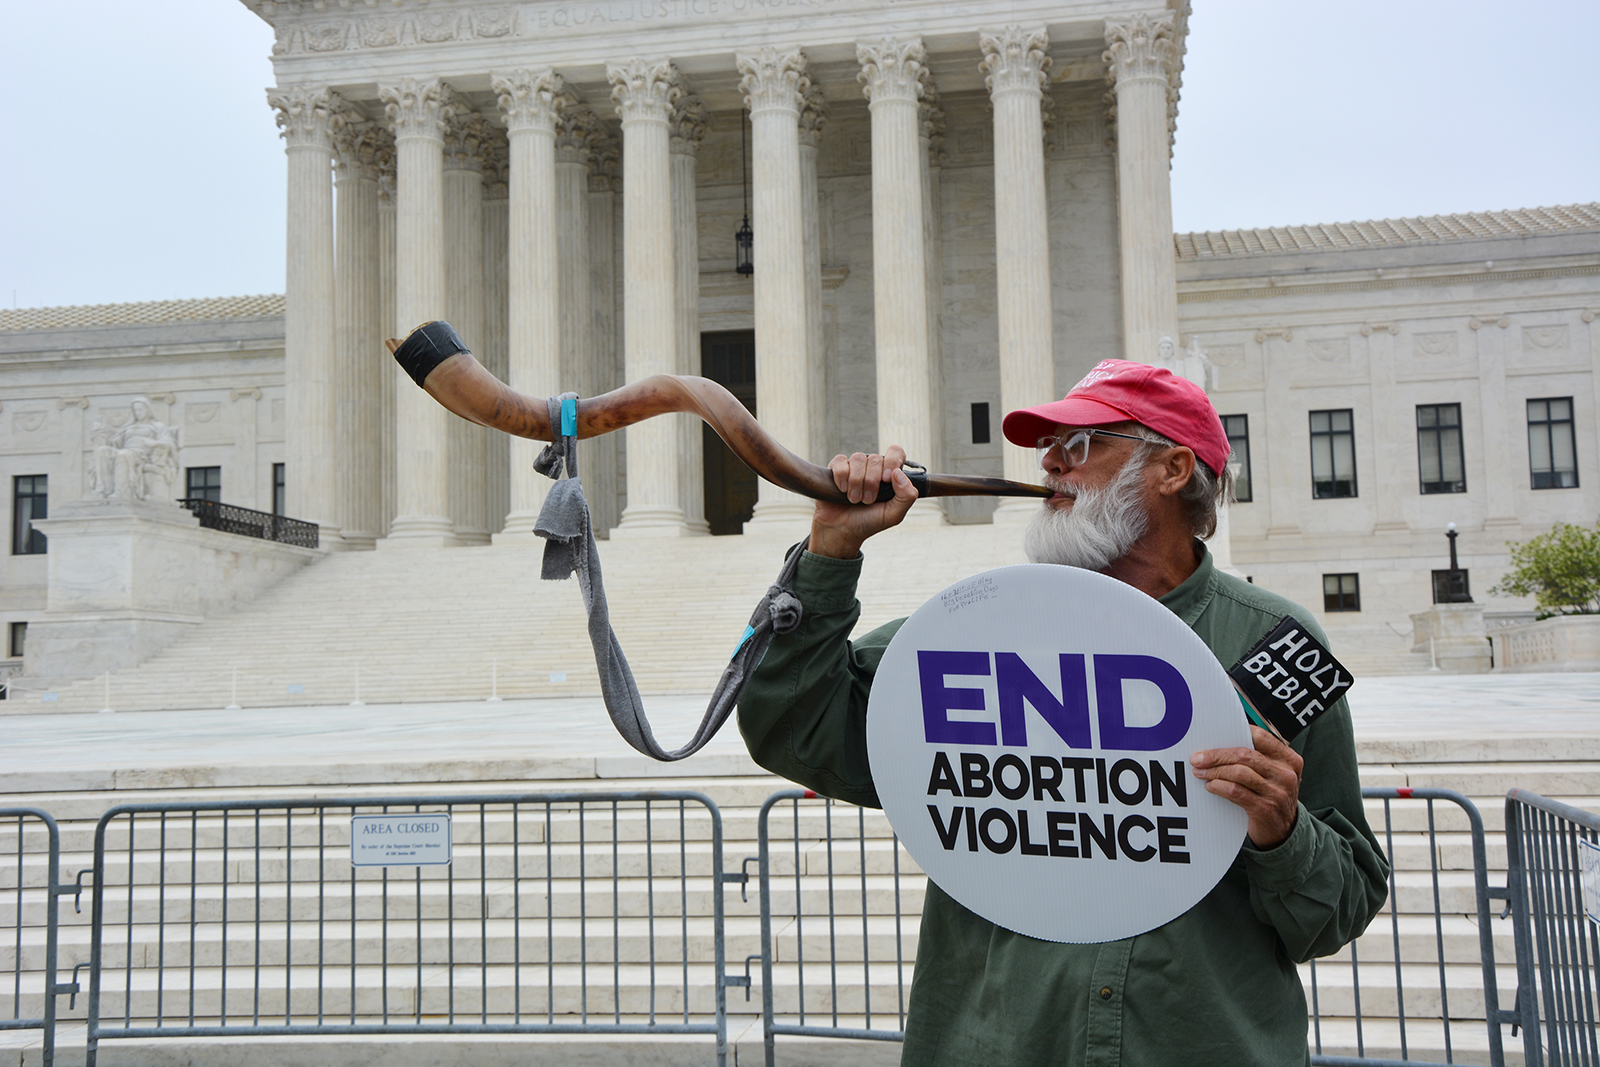 Steve Corson blows a shofar in front of the U.S. Supreme Court, Tuesday, May 3, 2022, in Washington. RNS photo by Jack Jenkins